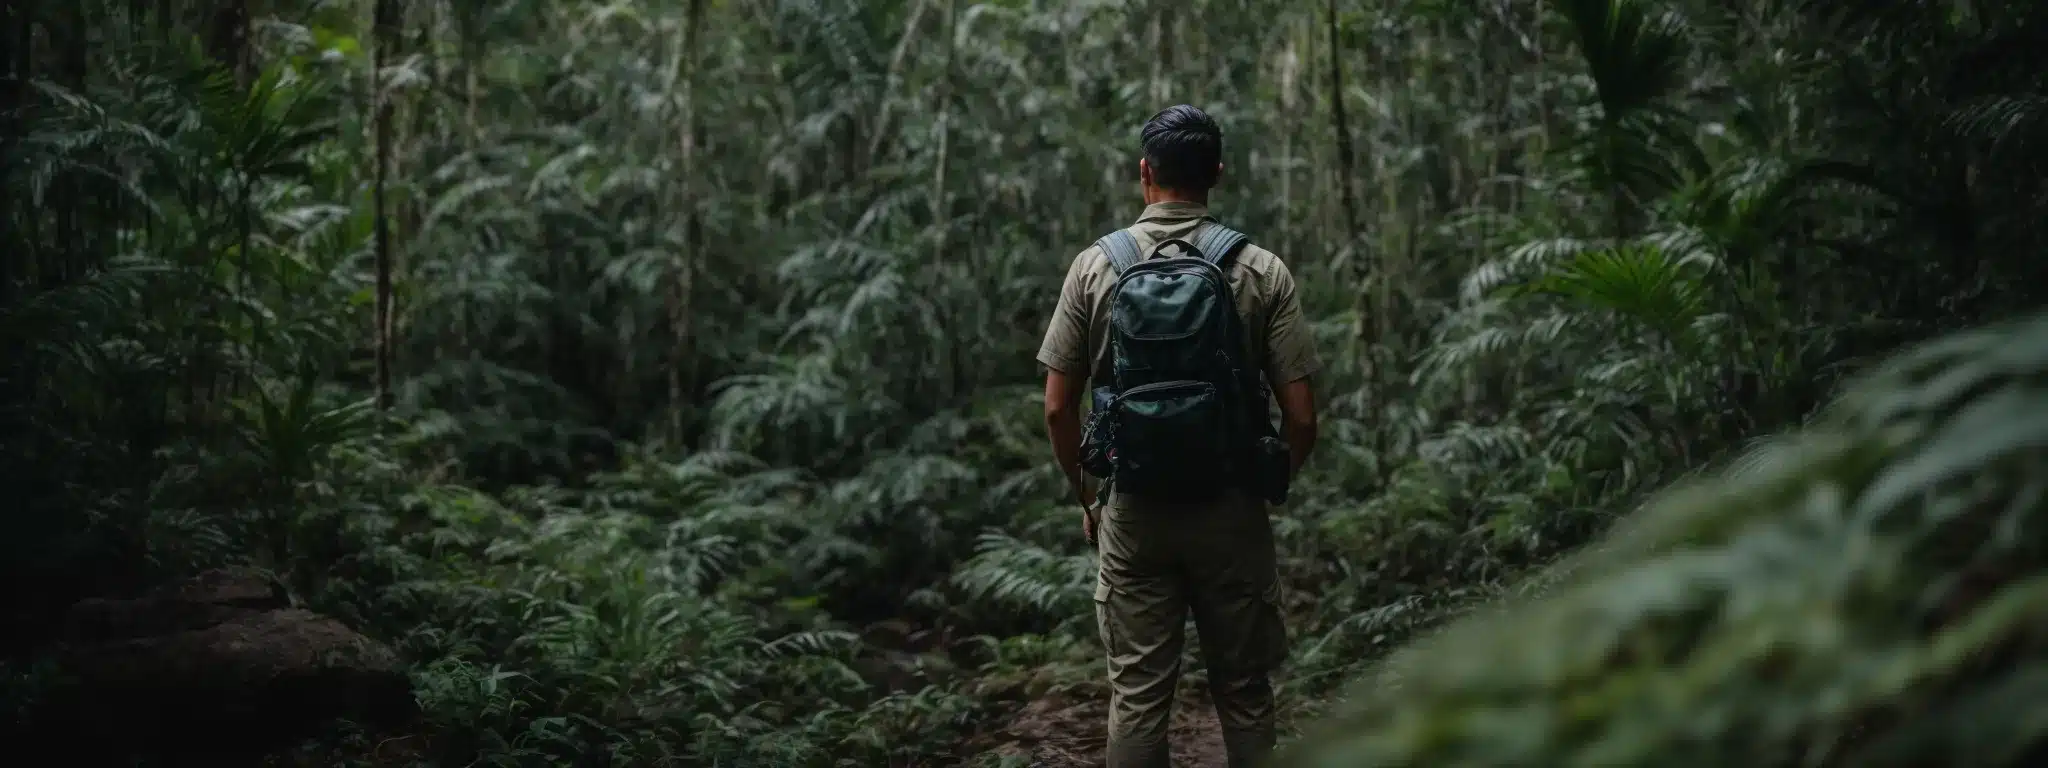 An Explorer Stands At The Edge Of A Dense Jungle, Compass In Hand, Ready To Navigate The Competitive Terrain.